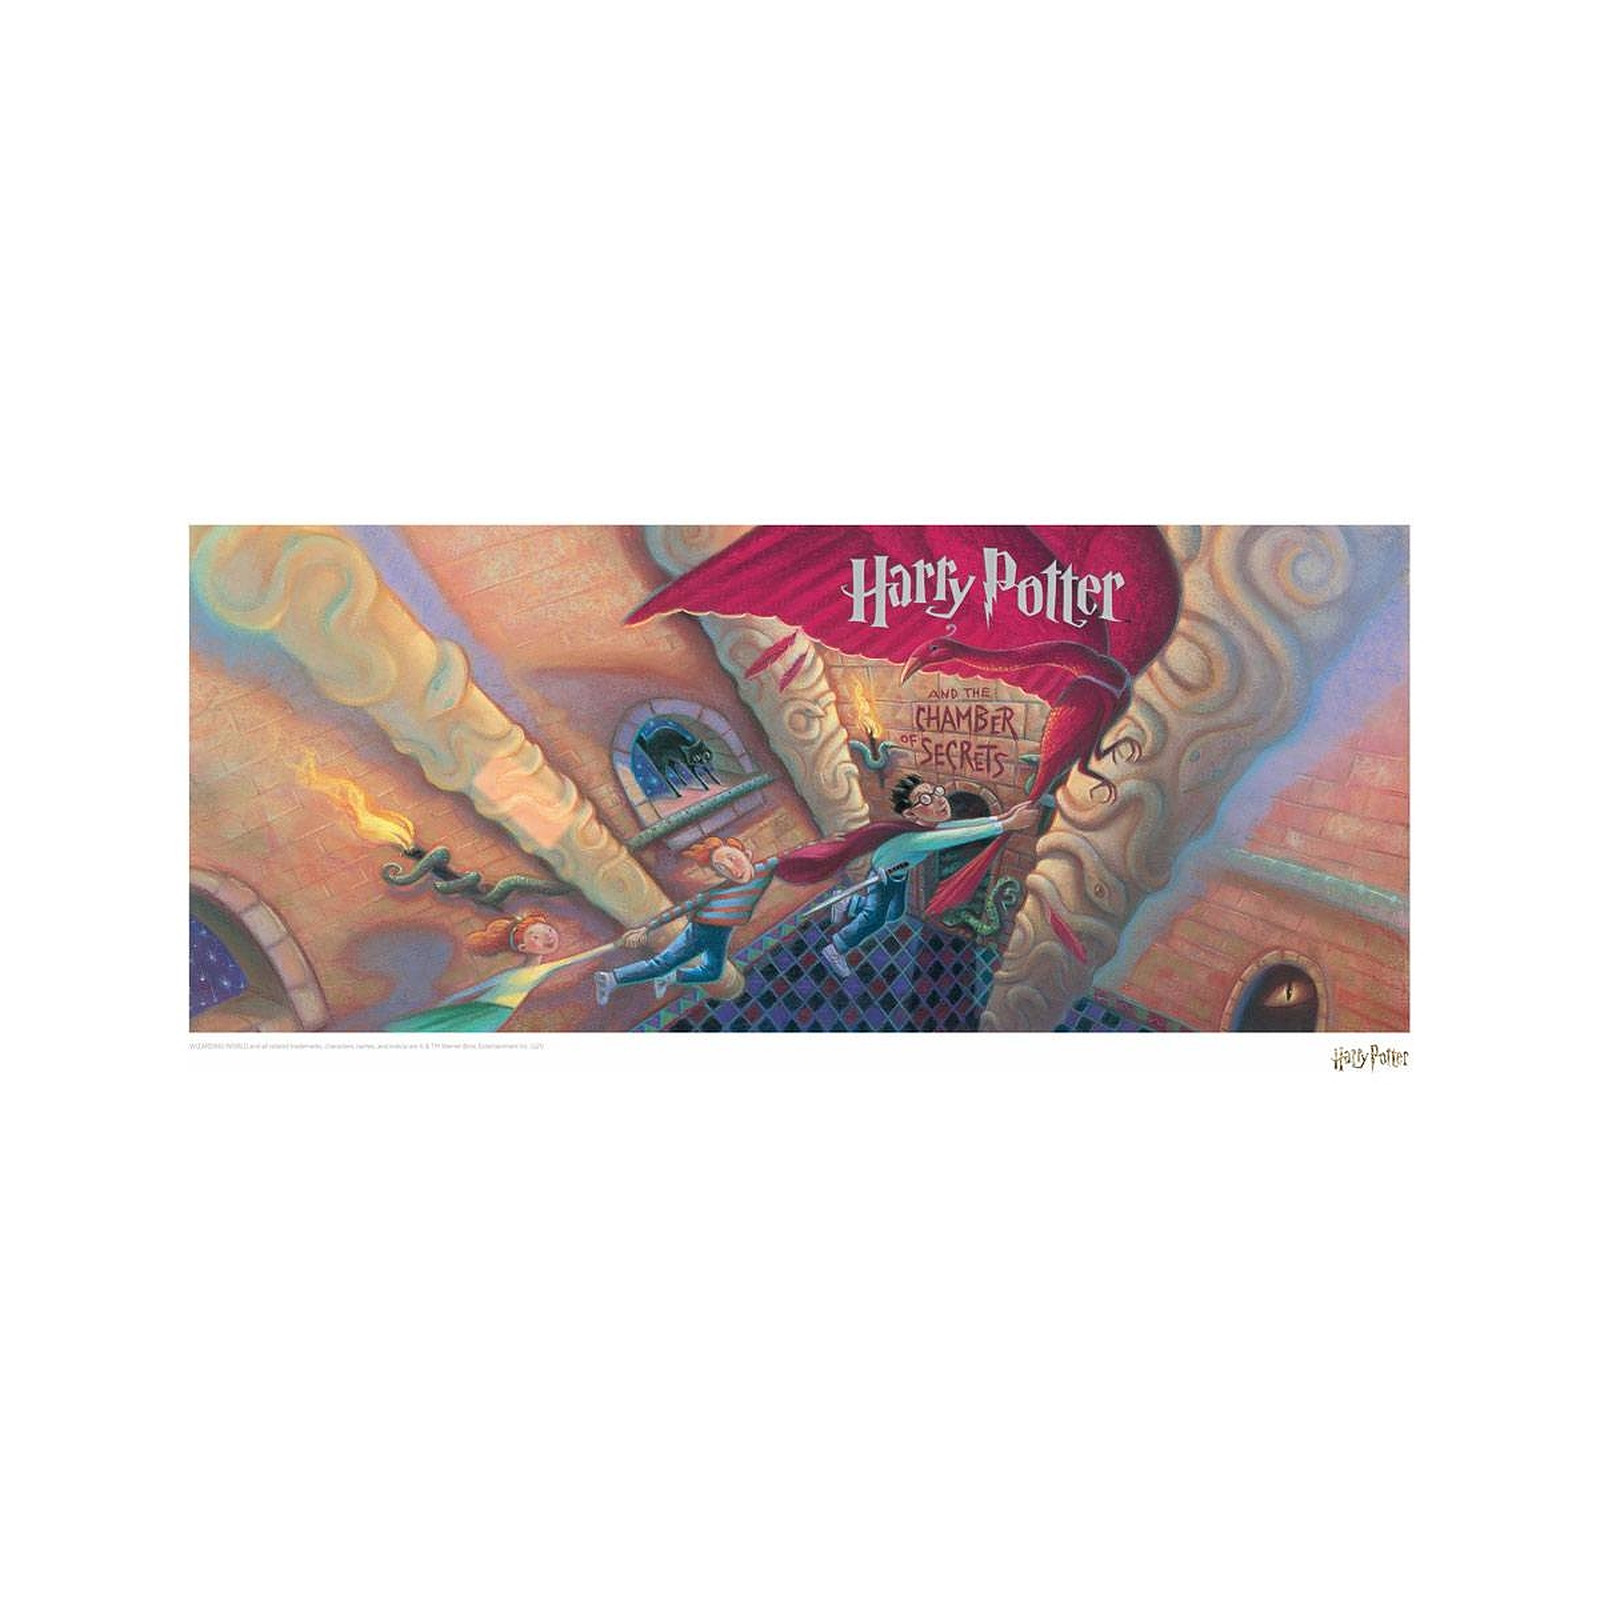 Harry Potter - Lithographie Chamber of Secrets Book Cover Artwork Limited Edition 42 x 30 cm - Posters Fanattik